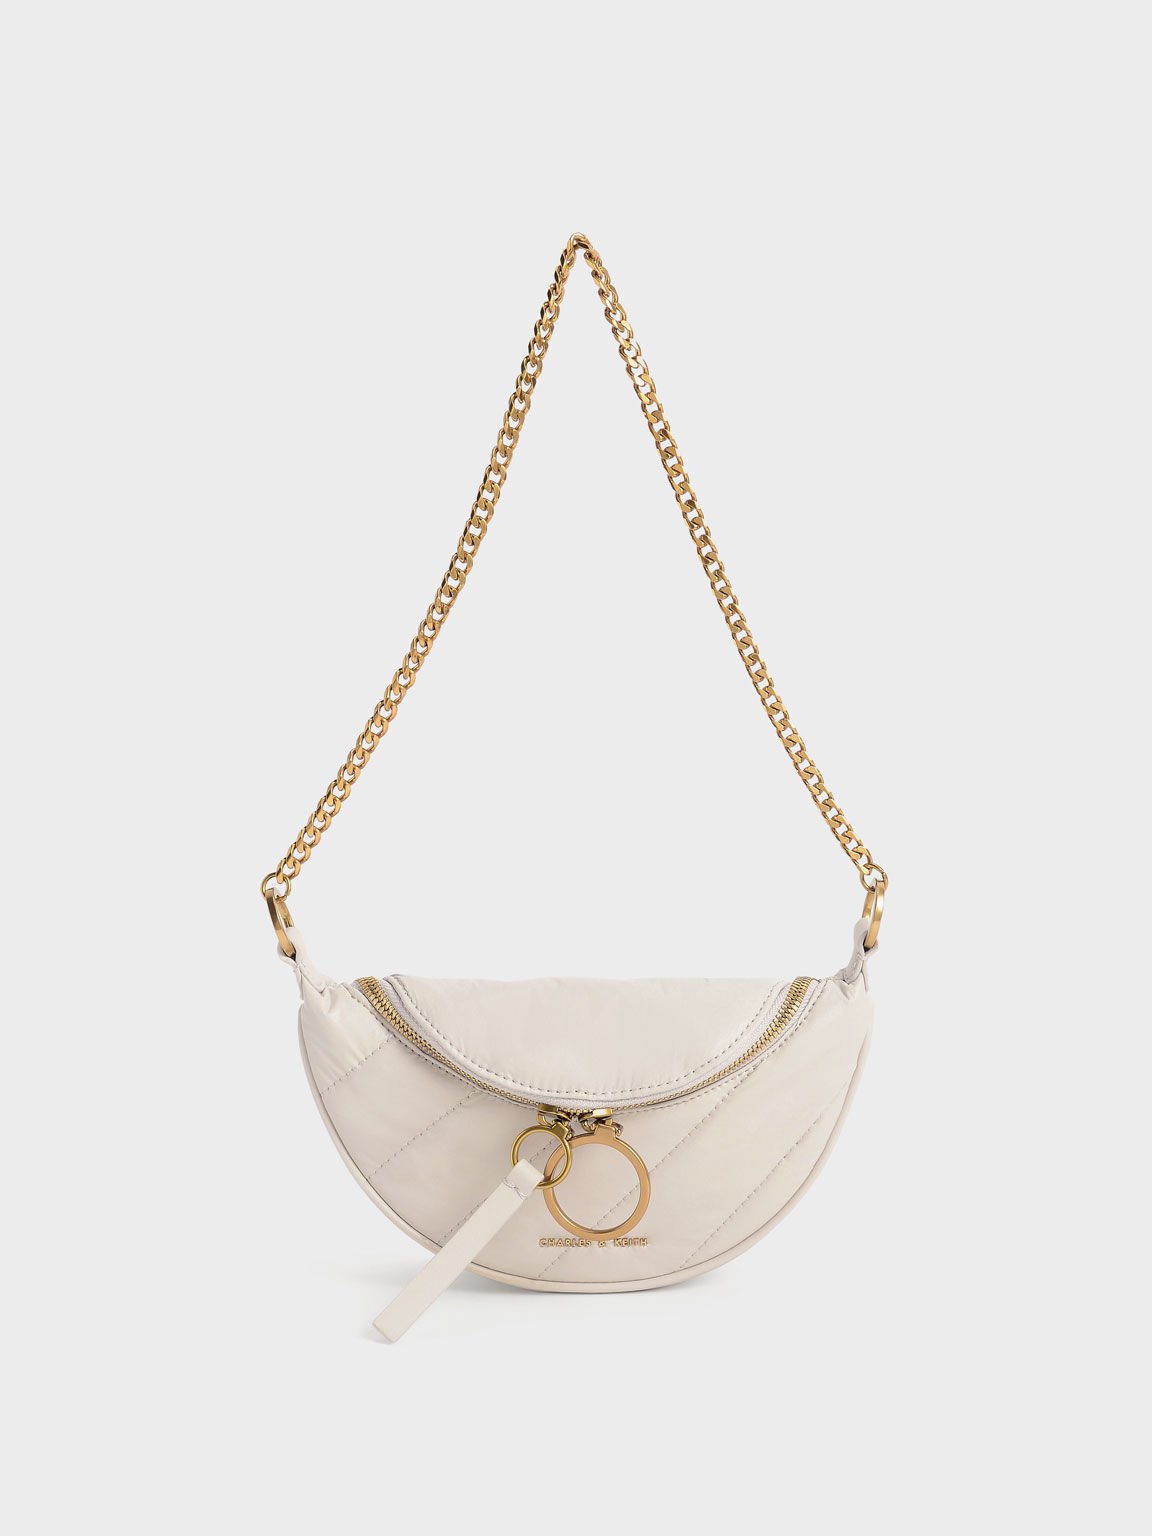 19 Crescent-Shaped Bags To Shop For Your Upcoming Fall Outfits